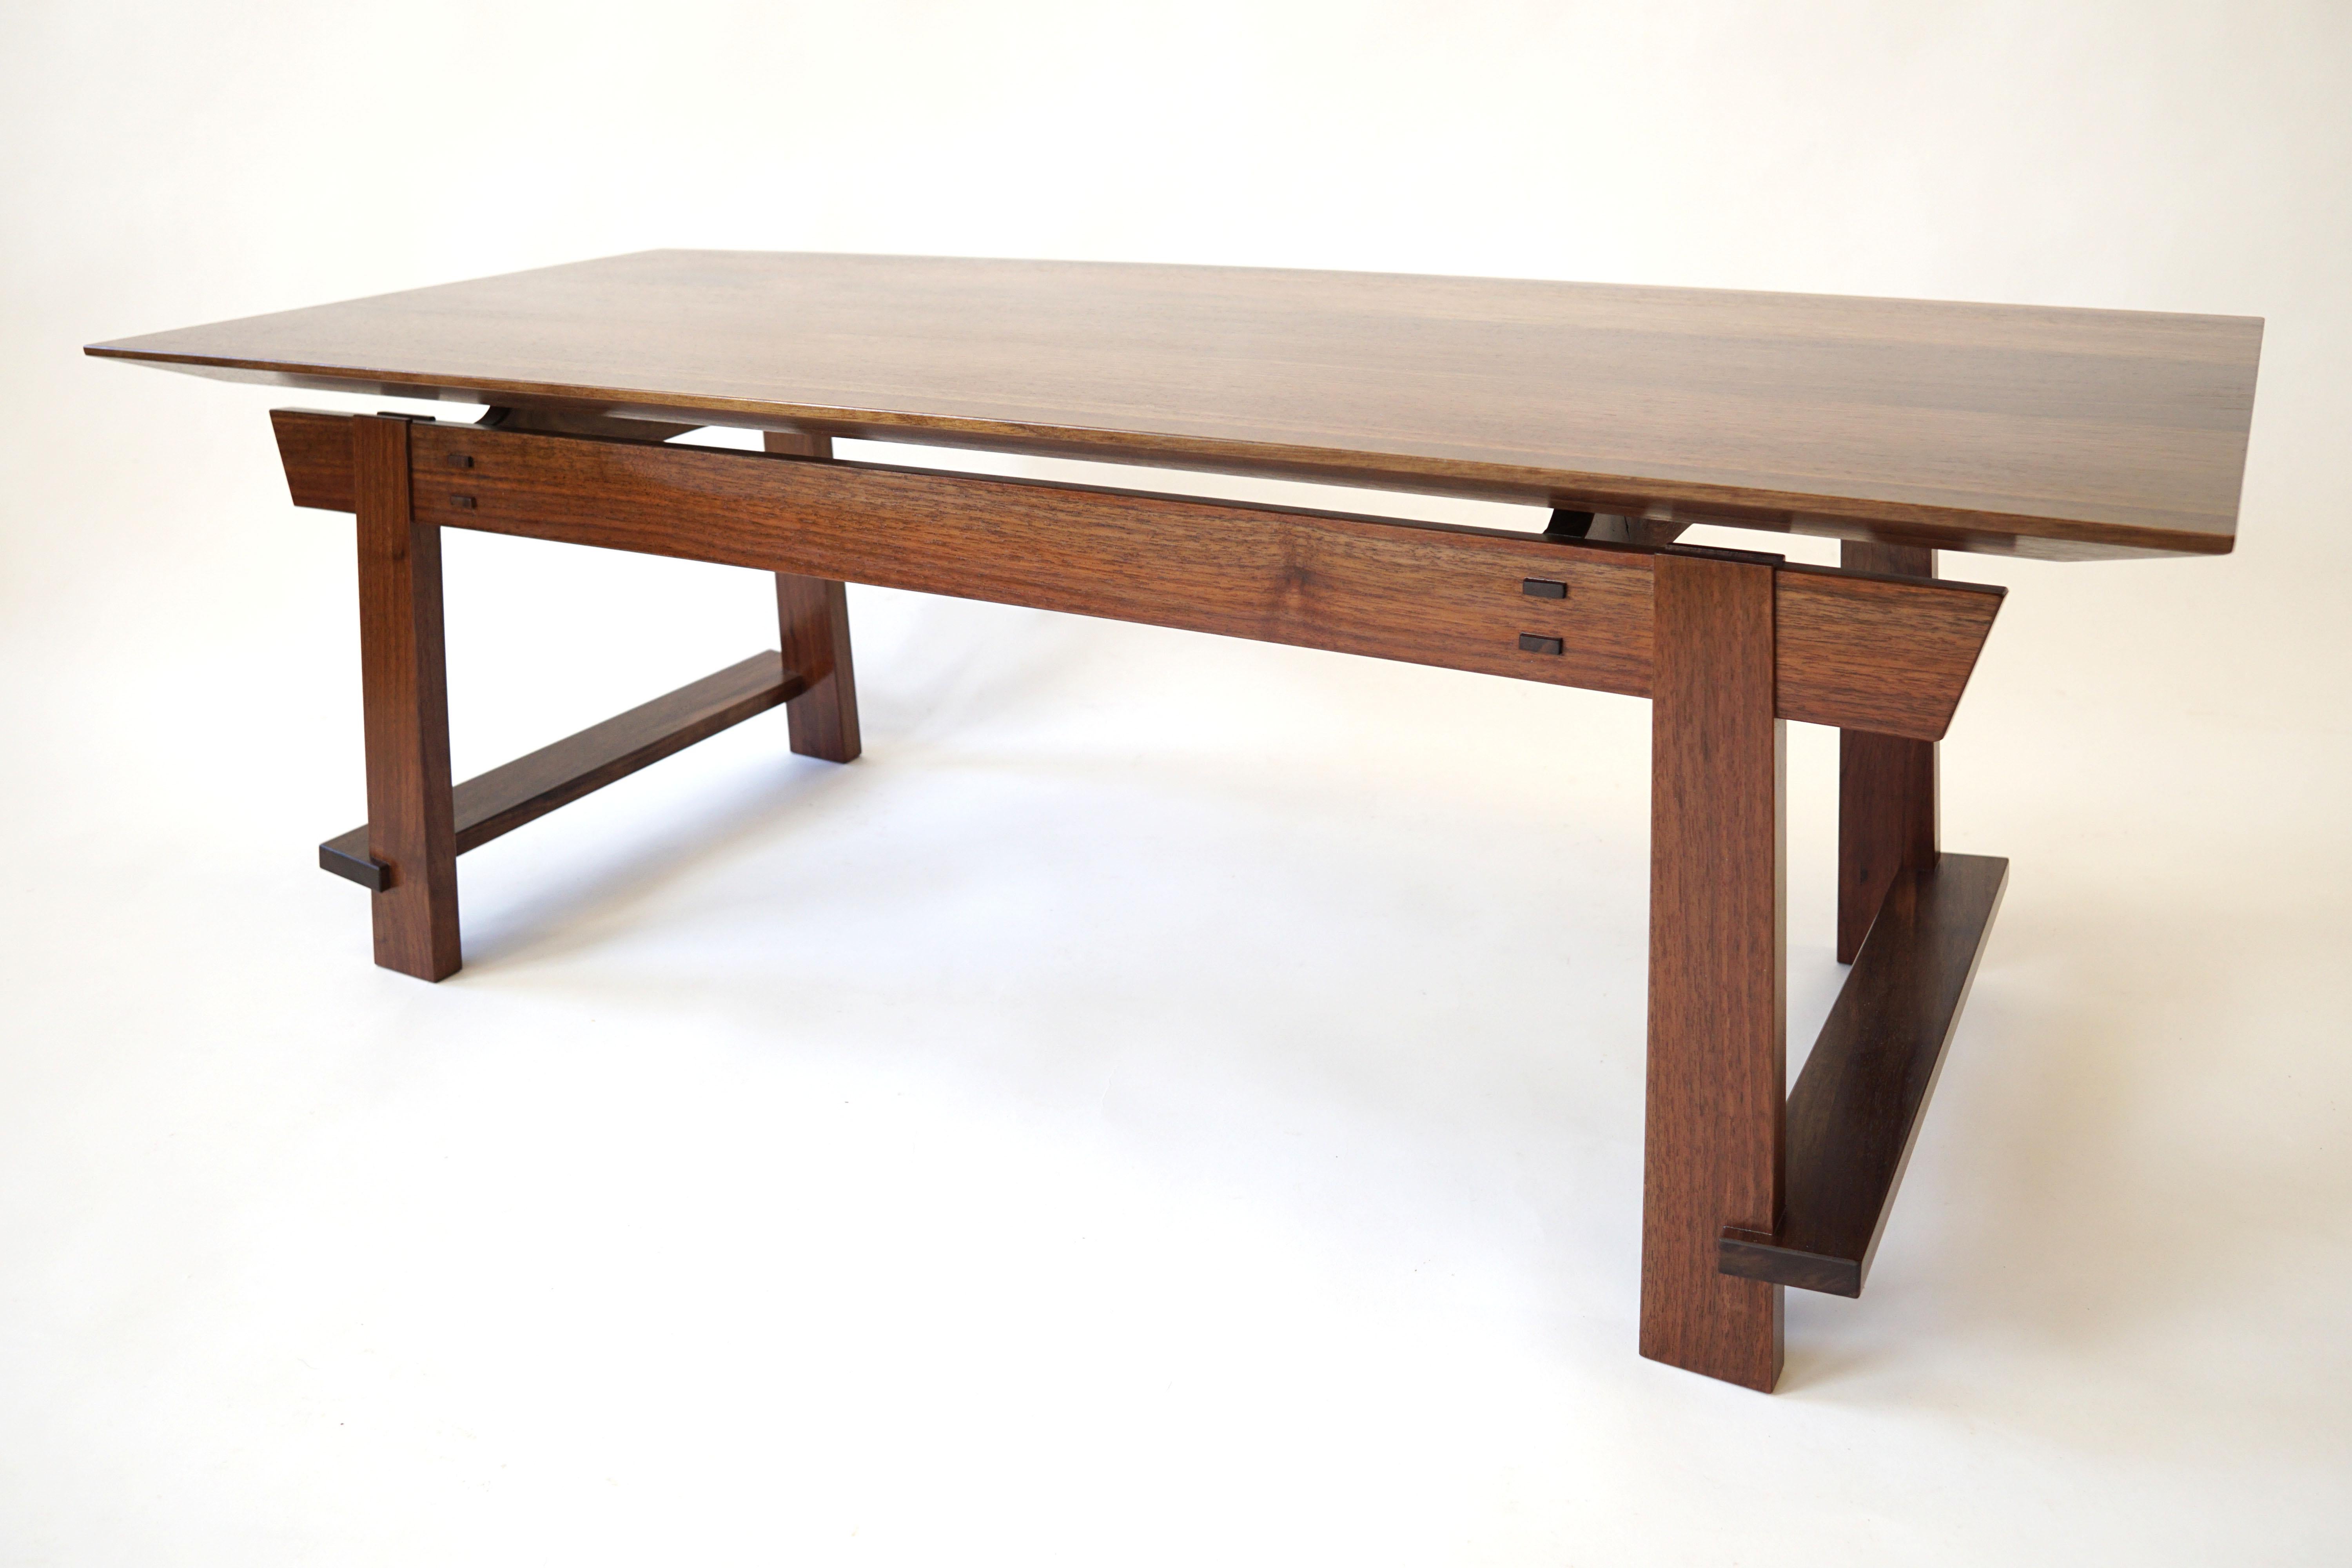 American Rilley Coffee Table, Exposed Joinery, Handcrafted in Walnut For Sale